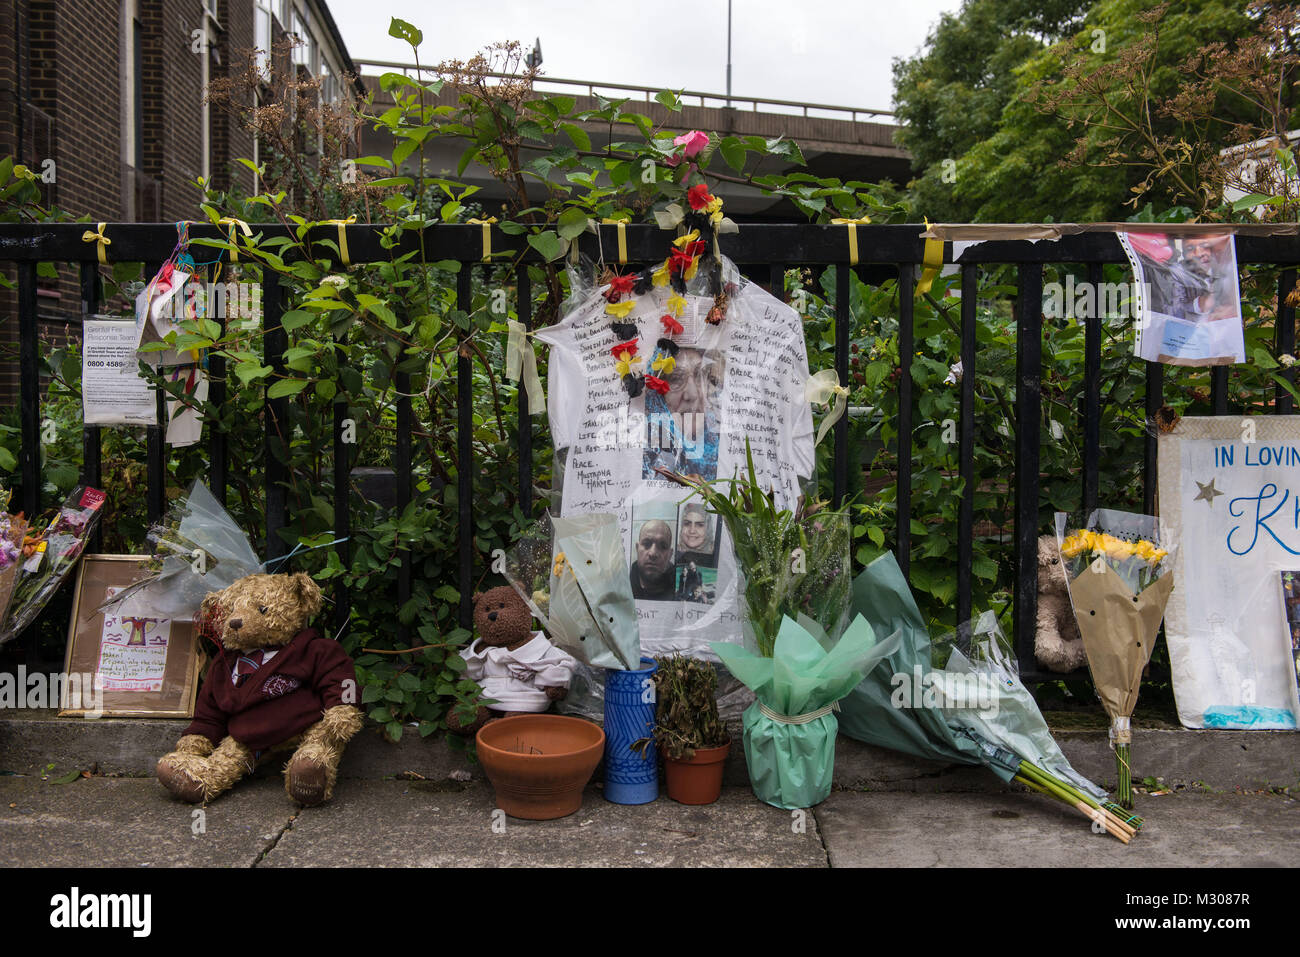 London, United Kingdom. Grenfell Tower victims memorial. Stock Photo